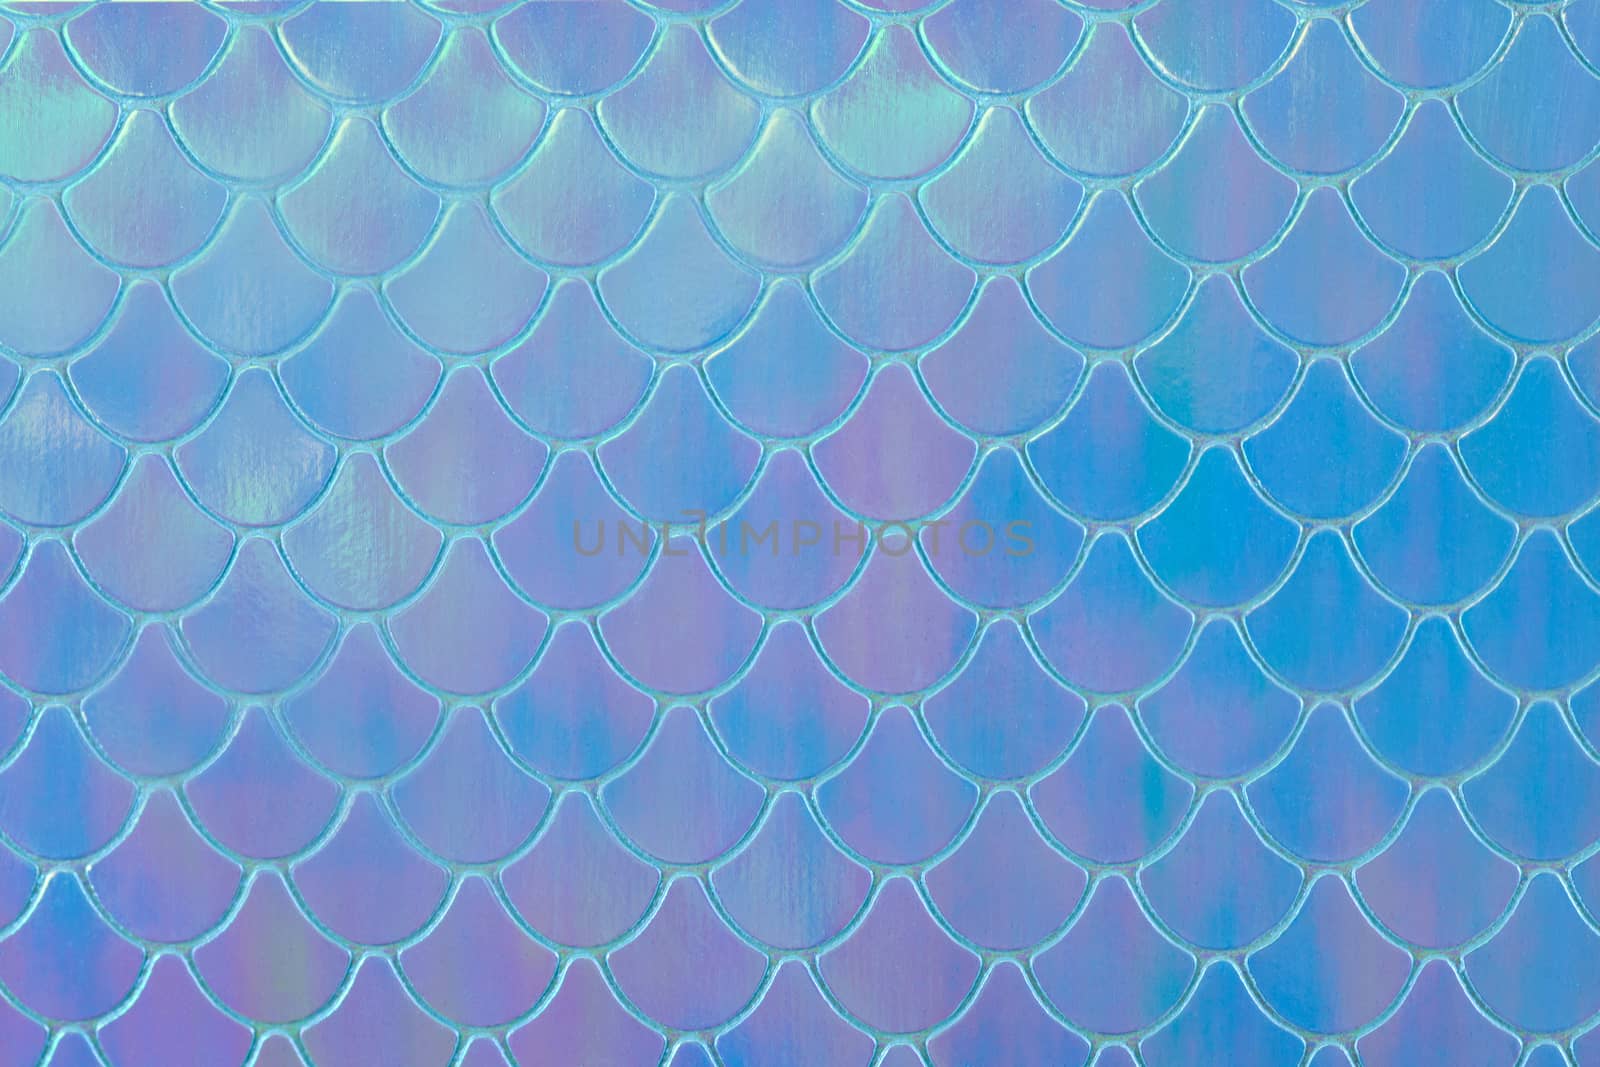 Abstract textured holographic background from leather surface, like mermaid or fish scales. Trendy multicolor texture with copy space. Celebration, holidays, fashion concept. Horizontal by ALLUNEED